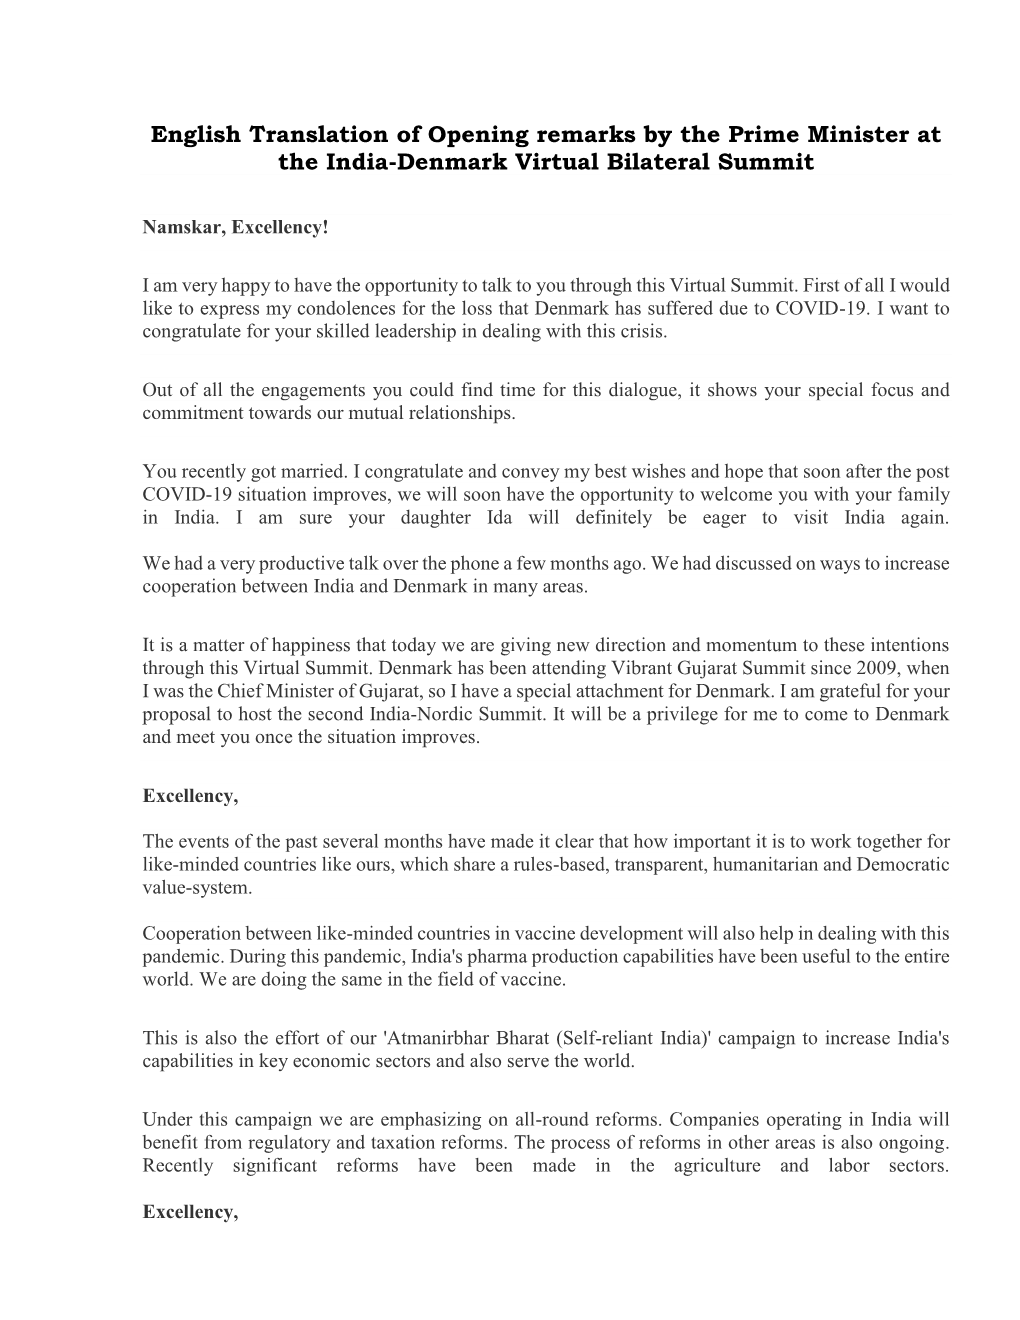 English Translation of Opening Remarks by the Prime Minister at the India-Denmark Virtual Bilateral Summit